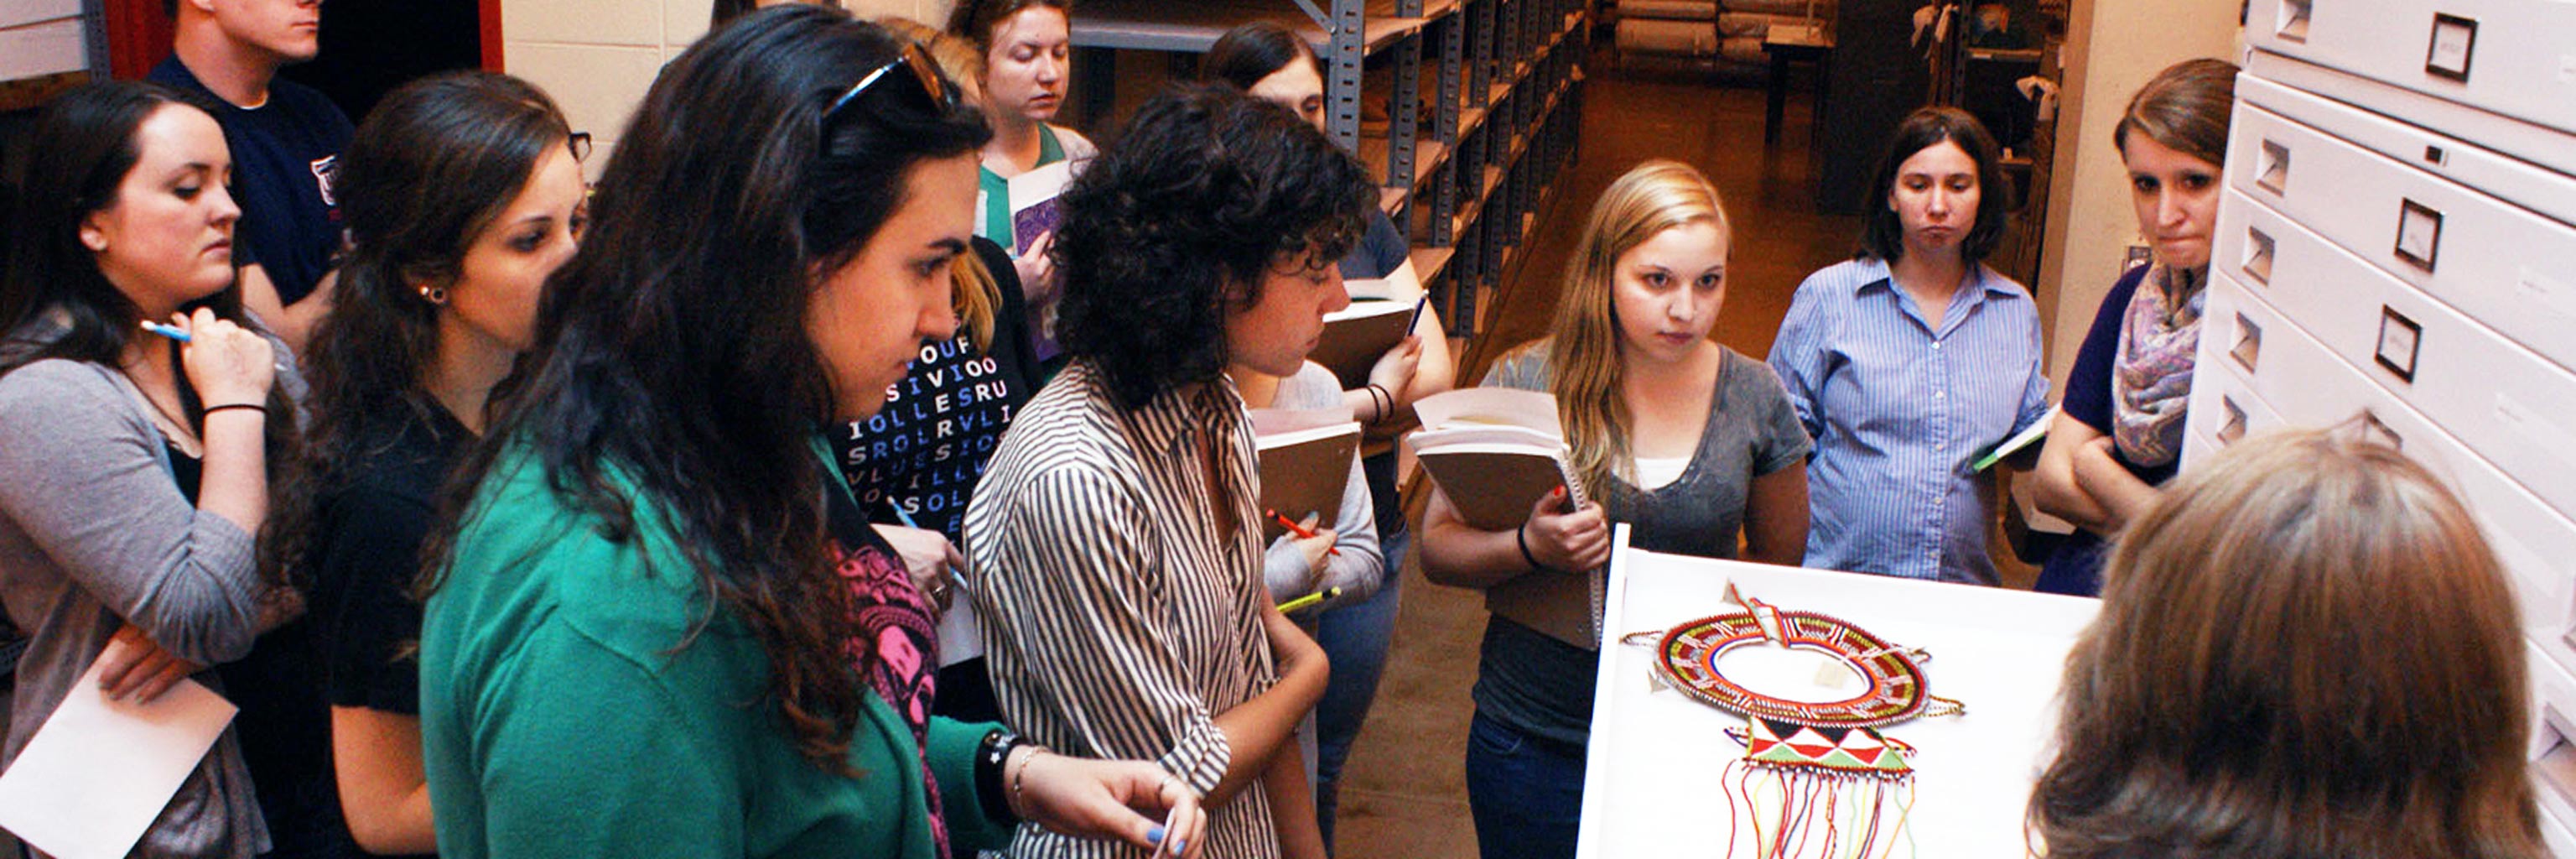 A group of students stand looking at a display and taking notes